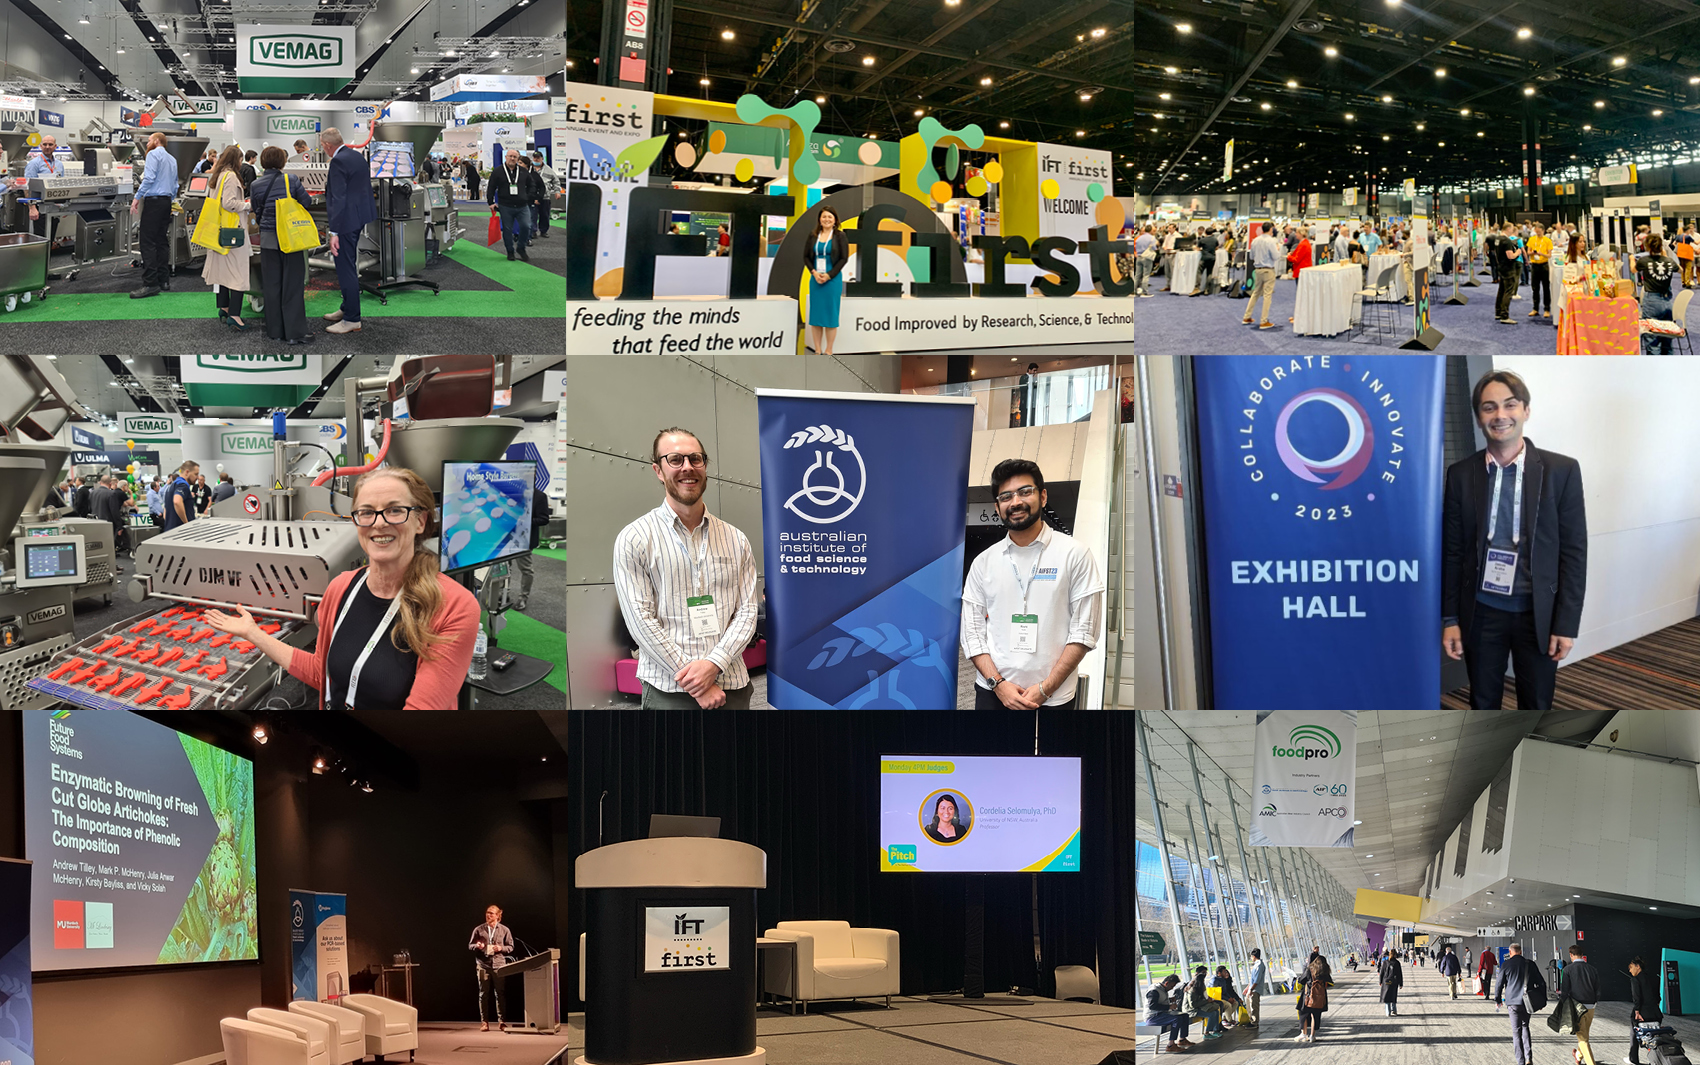 In July. Future Food Systems staff, research leads and PhDs represented FFS, our projects and our mission at conferences and agrifood events nationwide.